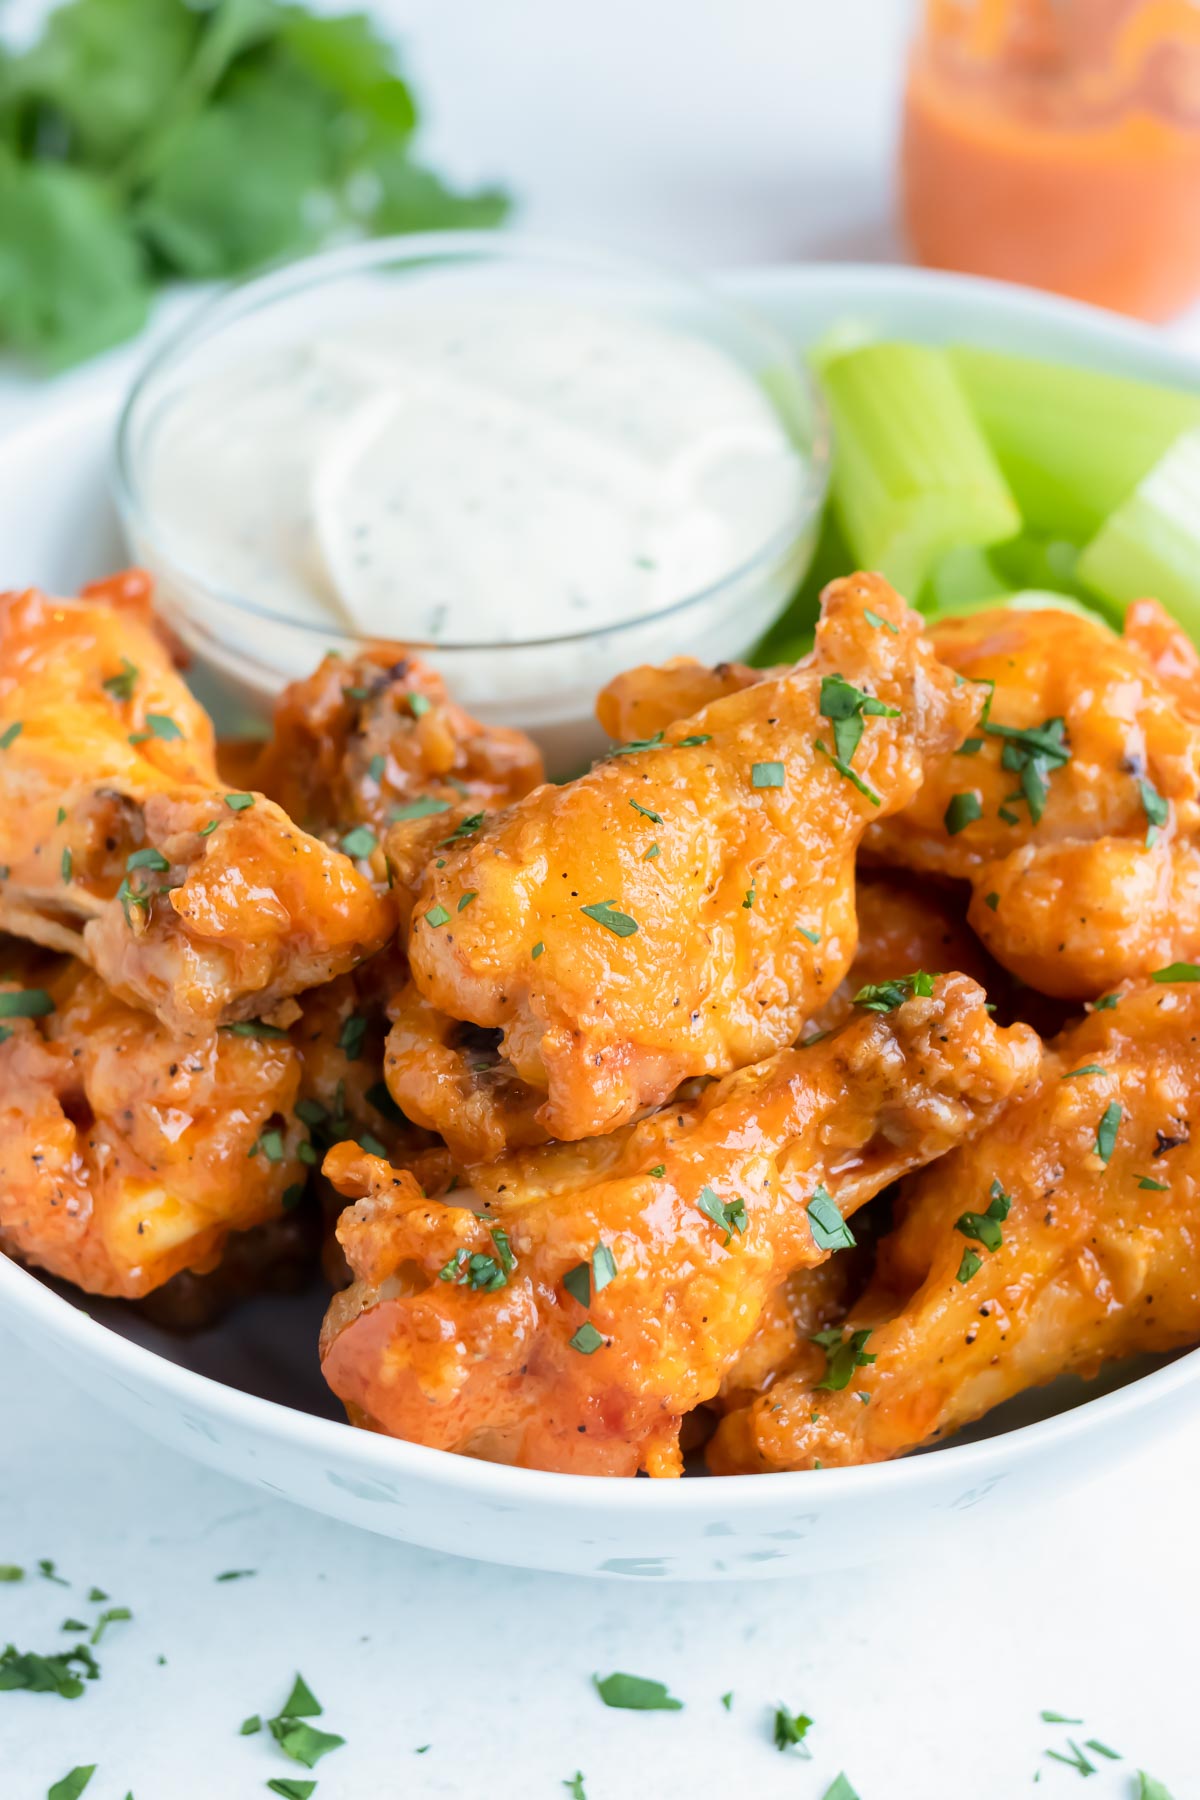 Crispy buffalo wings are served on a plate with celery and ranch.